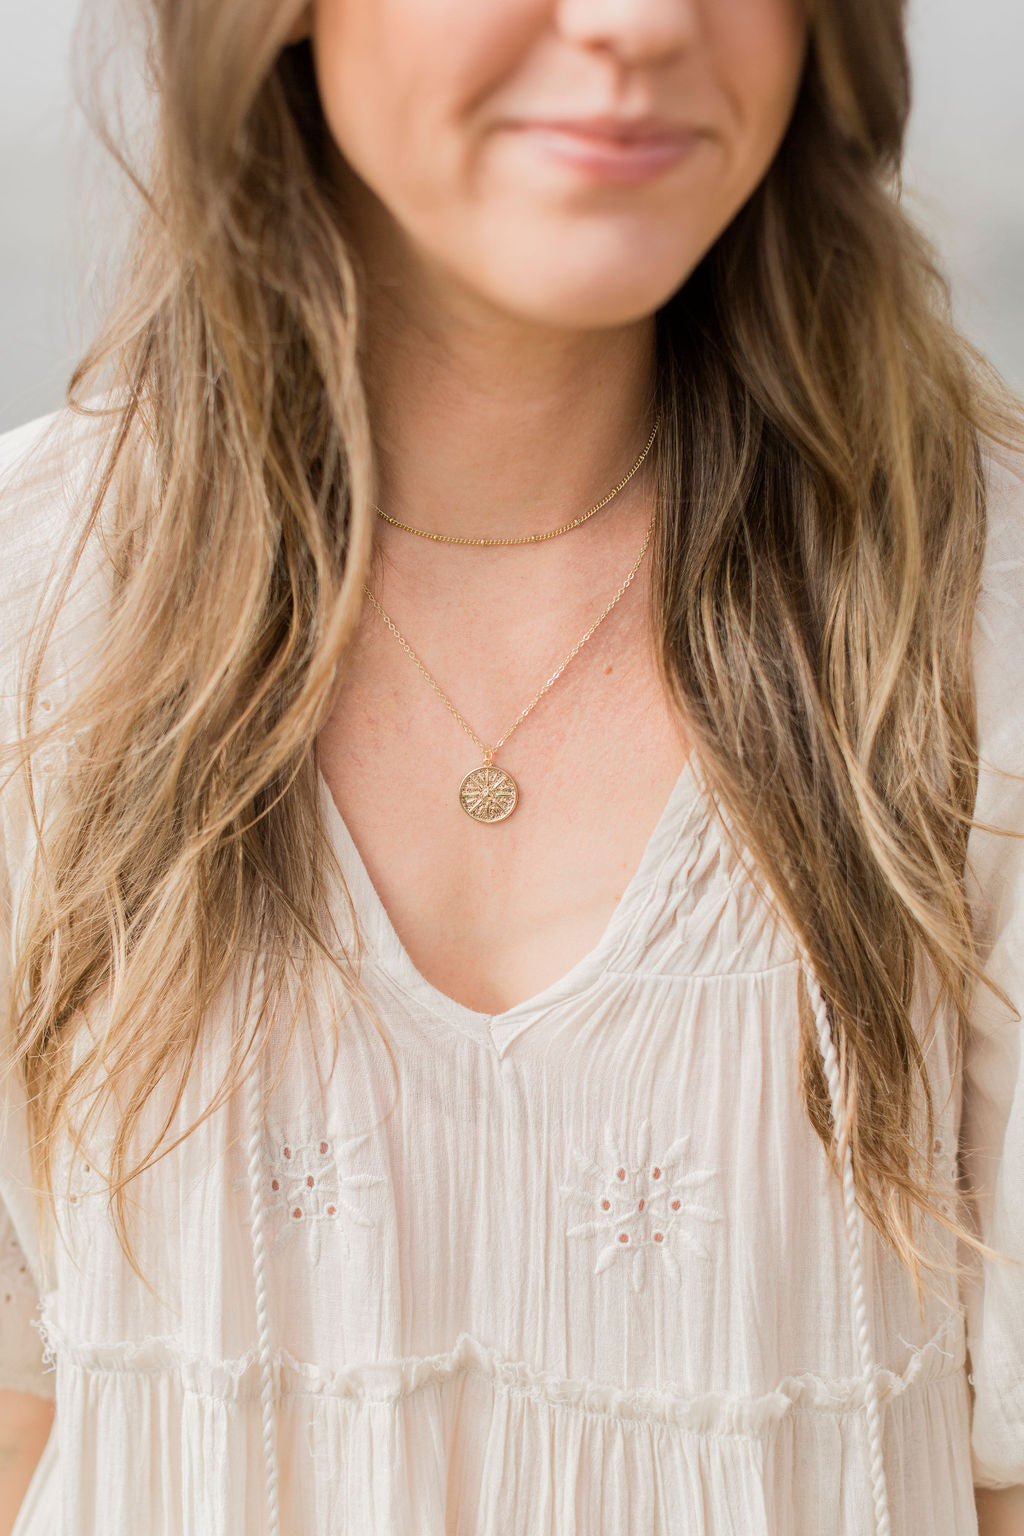 Medallion Diffusing Necklace - Put on Love Designs